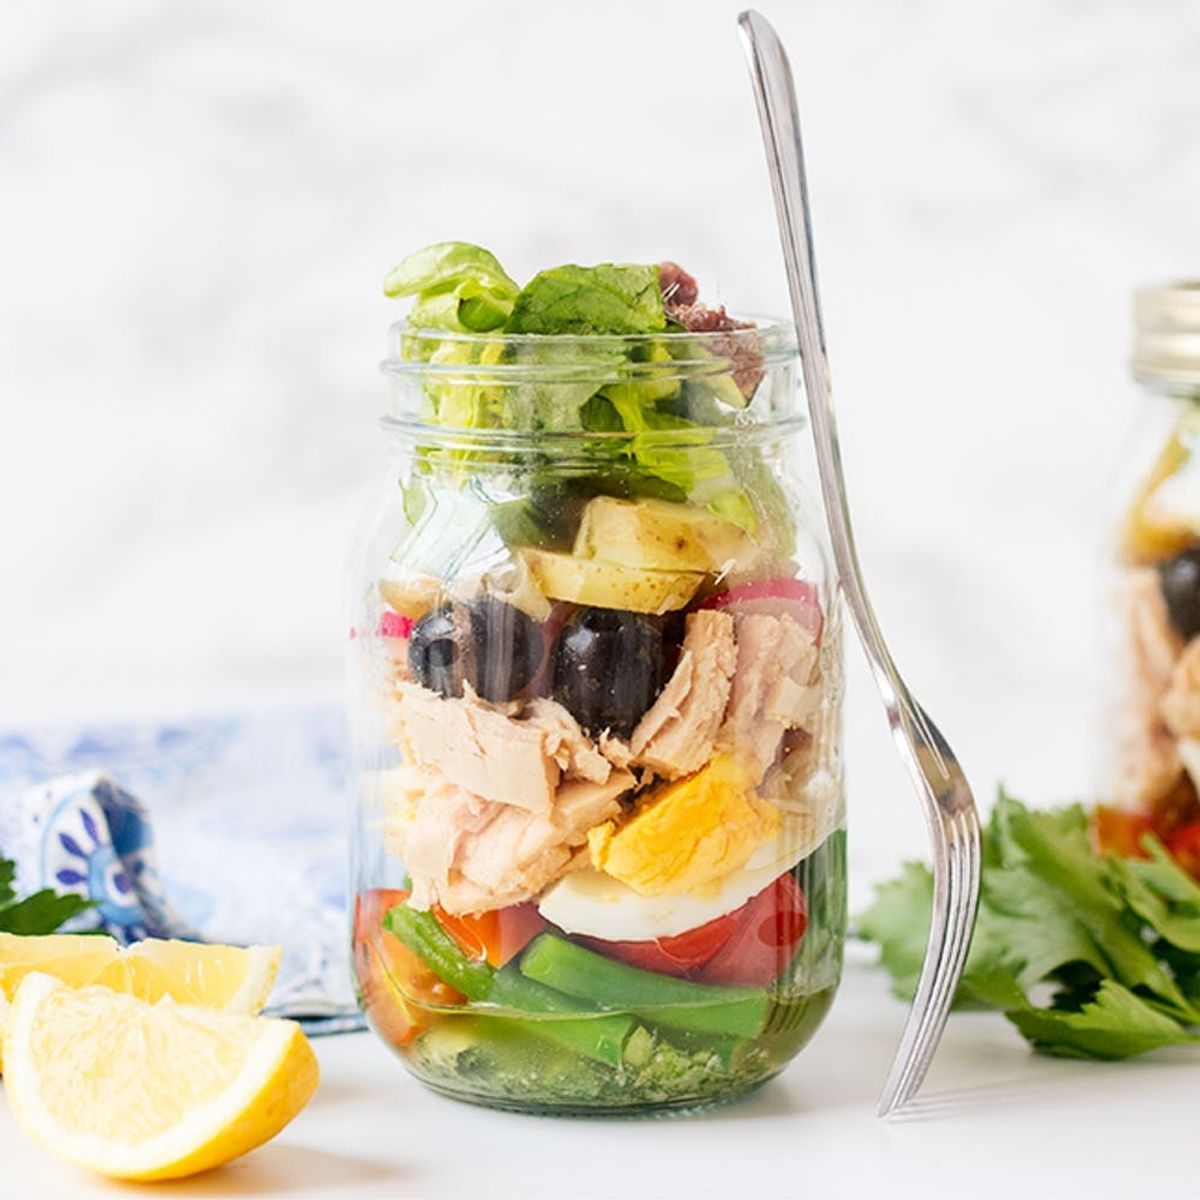 Beat the Back-To-School Blues With This Mason Jar Lunch